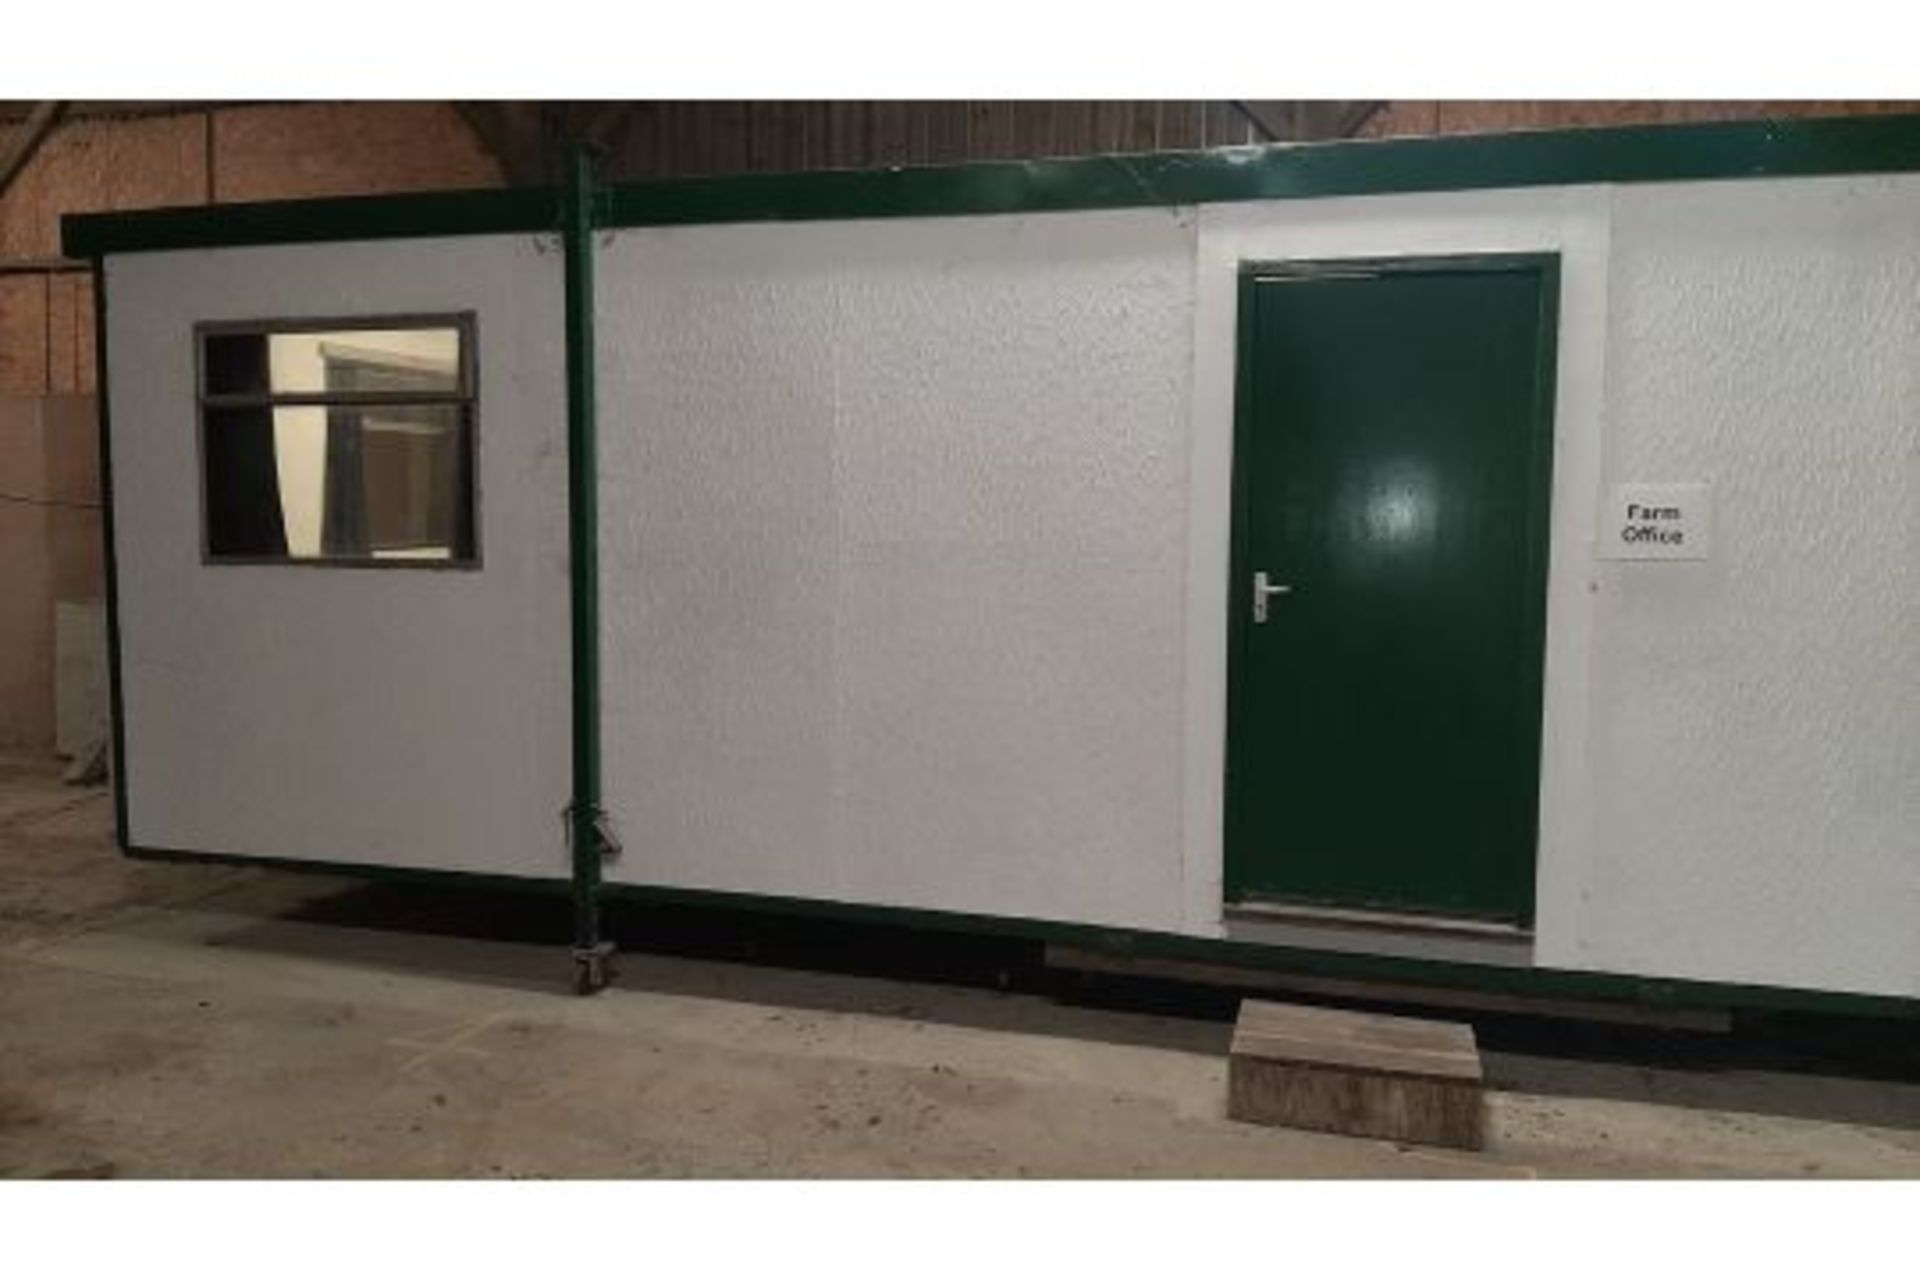 10ft x 32ft jack leg cabin. With two 10ftx 14ft rooms and hall. Used as office inside building. - Image 4 of 18